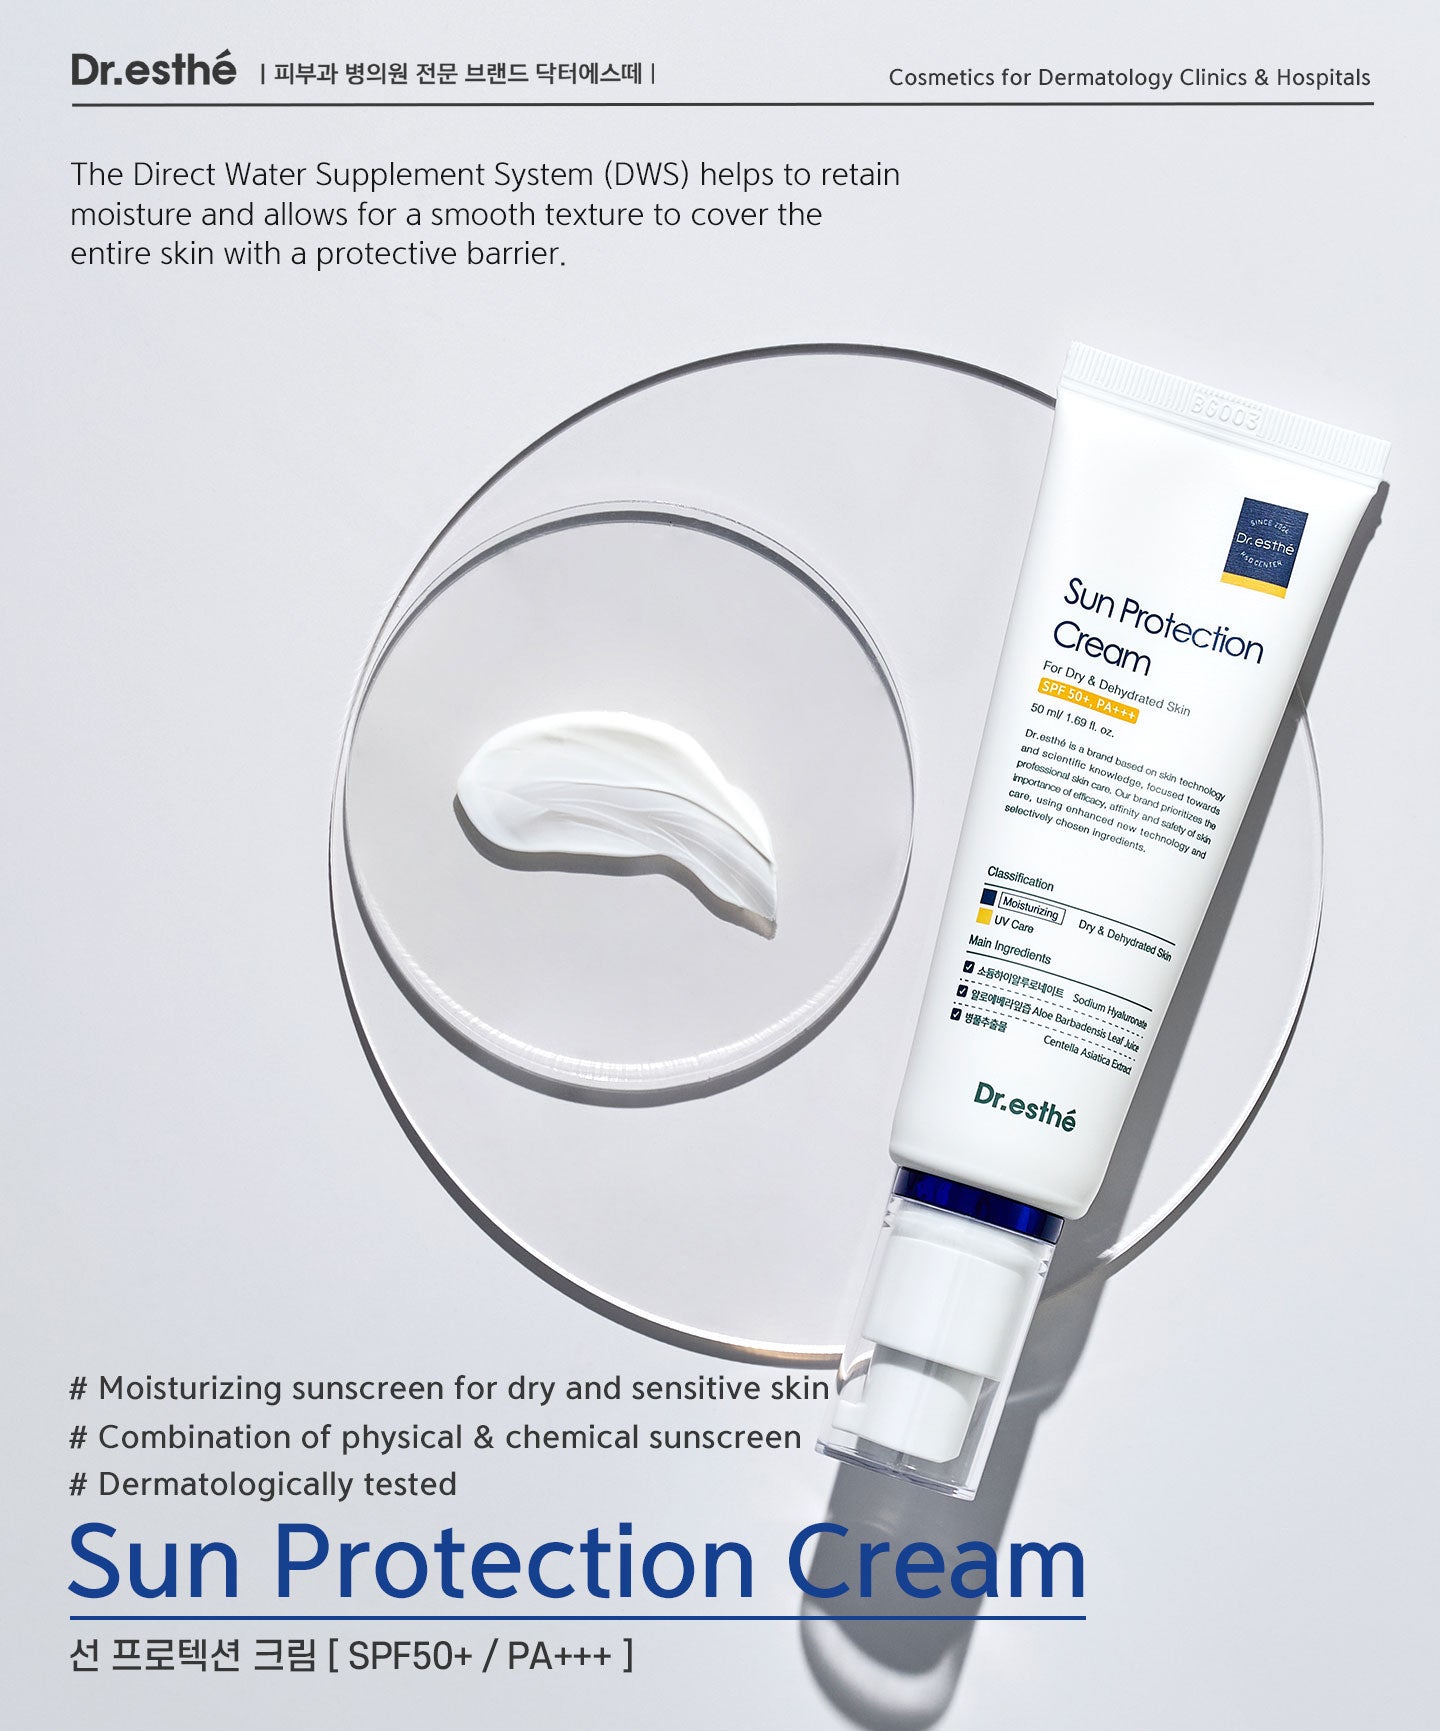 Sun protection cream. The direct water supplement system helps to retain moisture and allows for a smooth texture to cover the entire skin with a protective barrier. Moisturizing sunscreen for dry and sensitive skin, combination of physical & chemical 